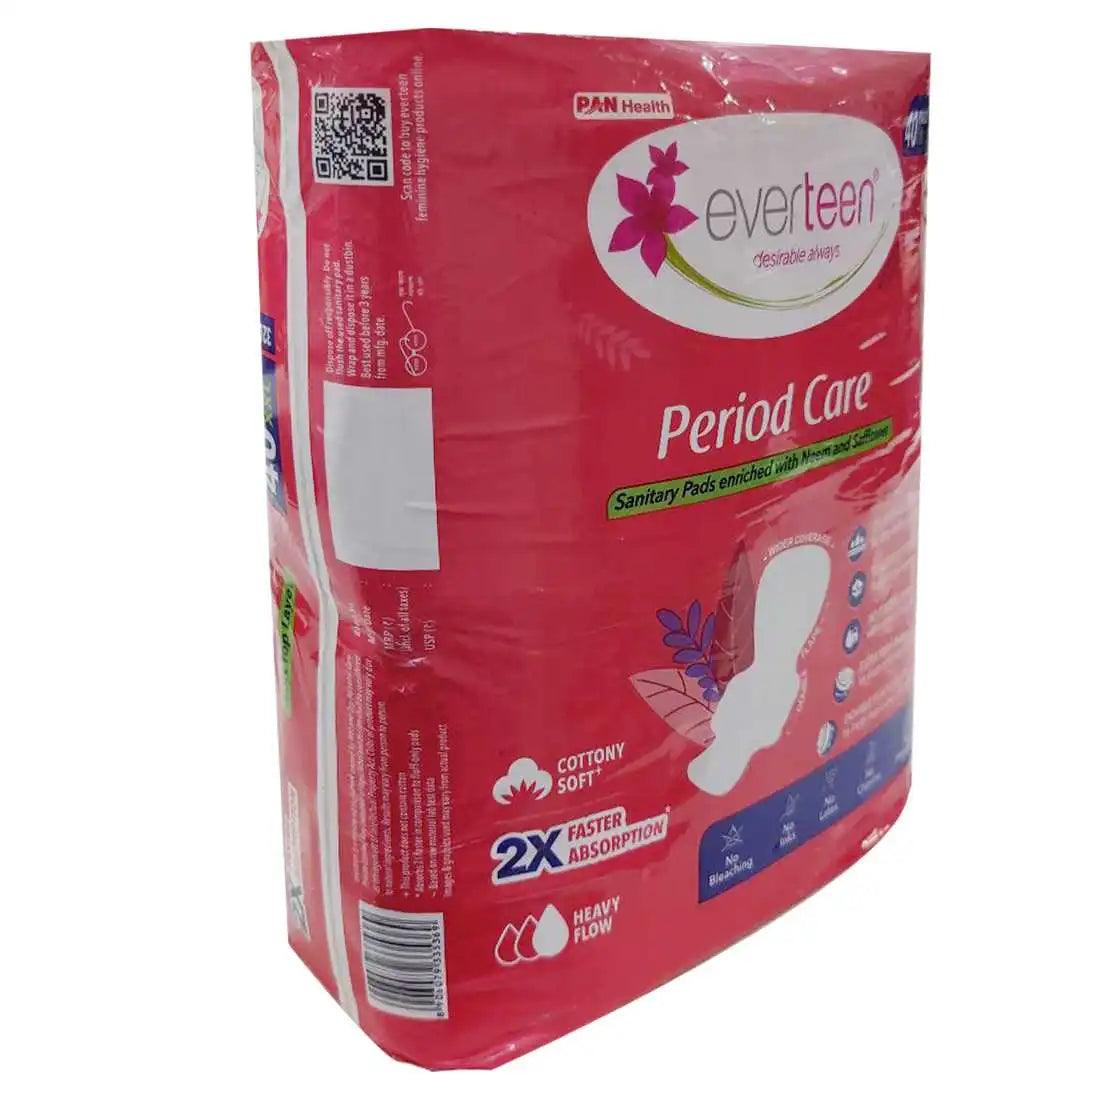 everteen Period Care XXL Sanitary Pads with Double Flaps, Neem and Safflower - 40 Pads - everteen-neud.com